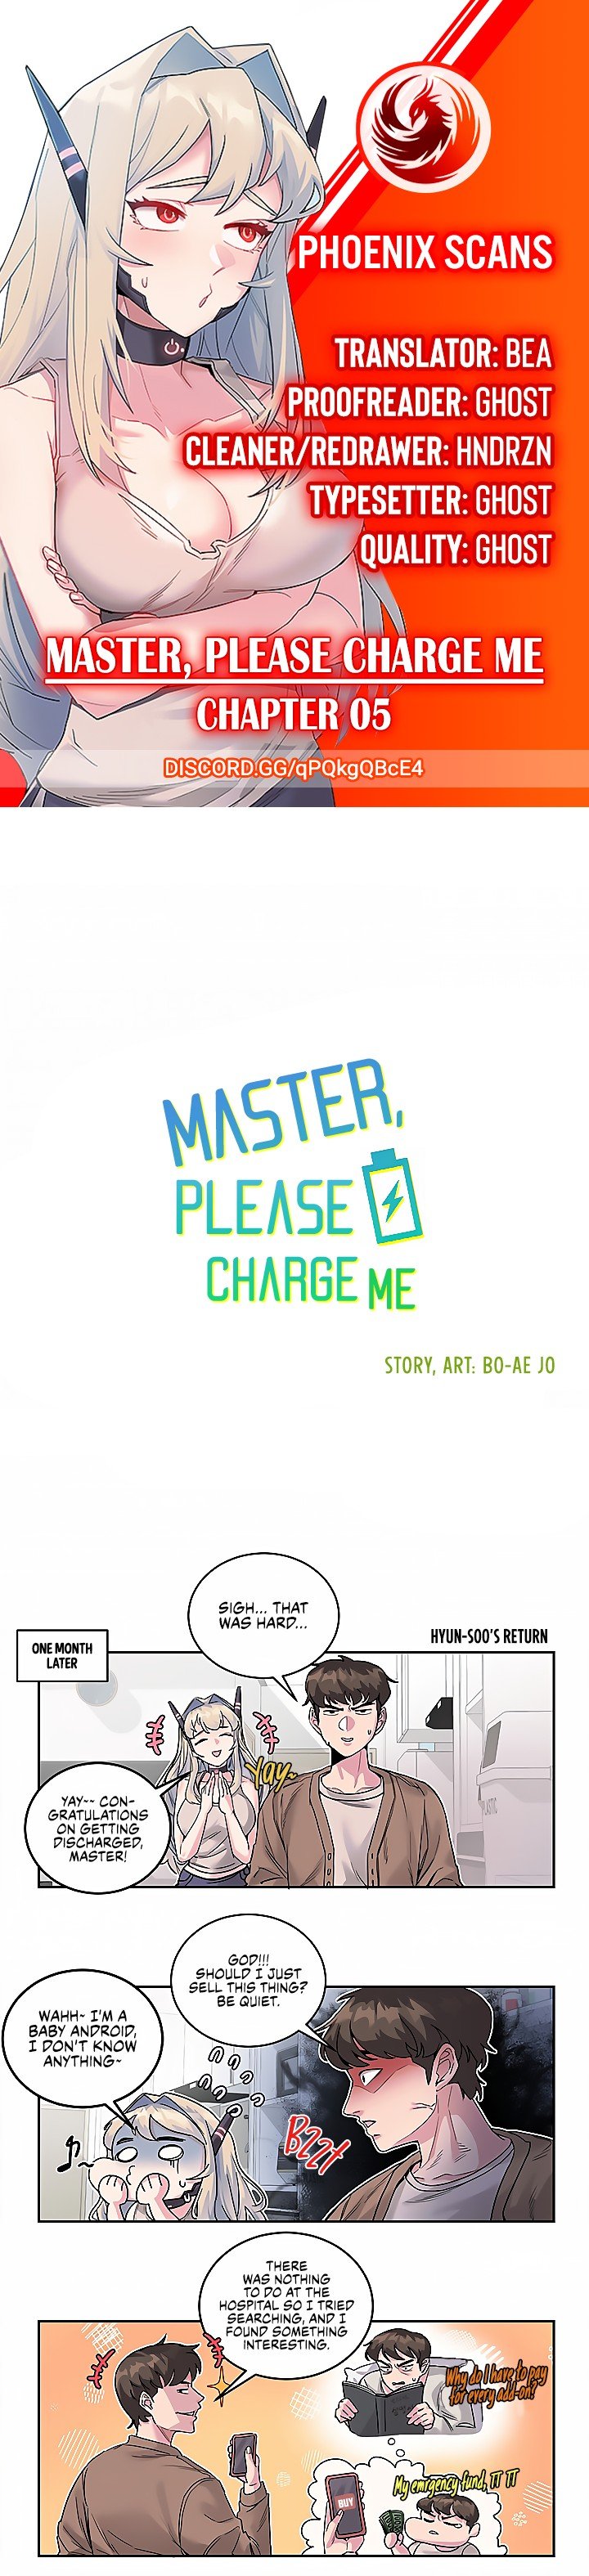 master-please-charge-me-chap-5-0